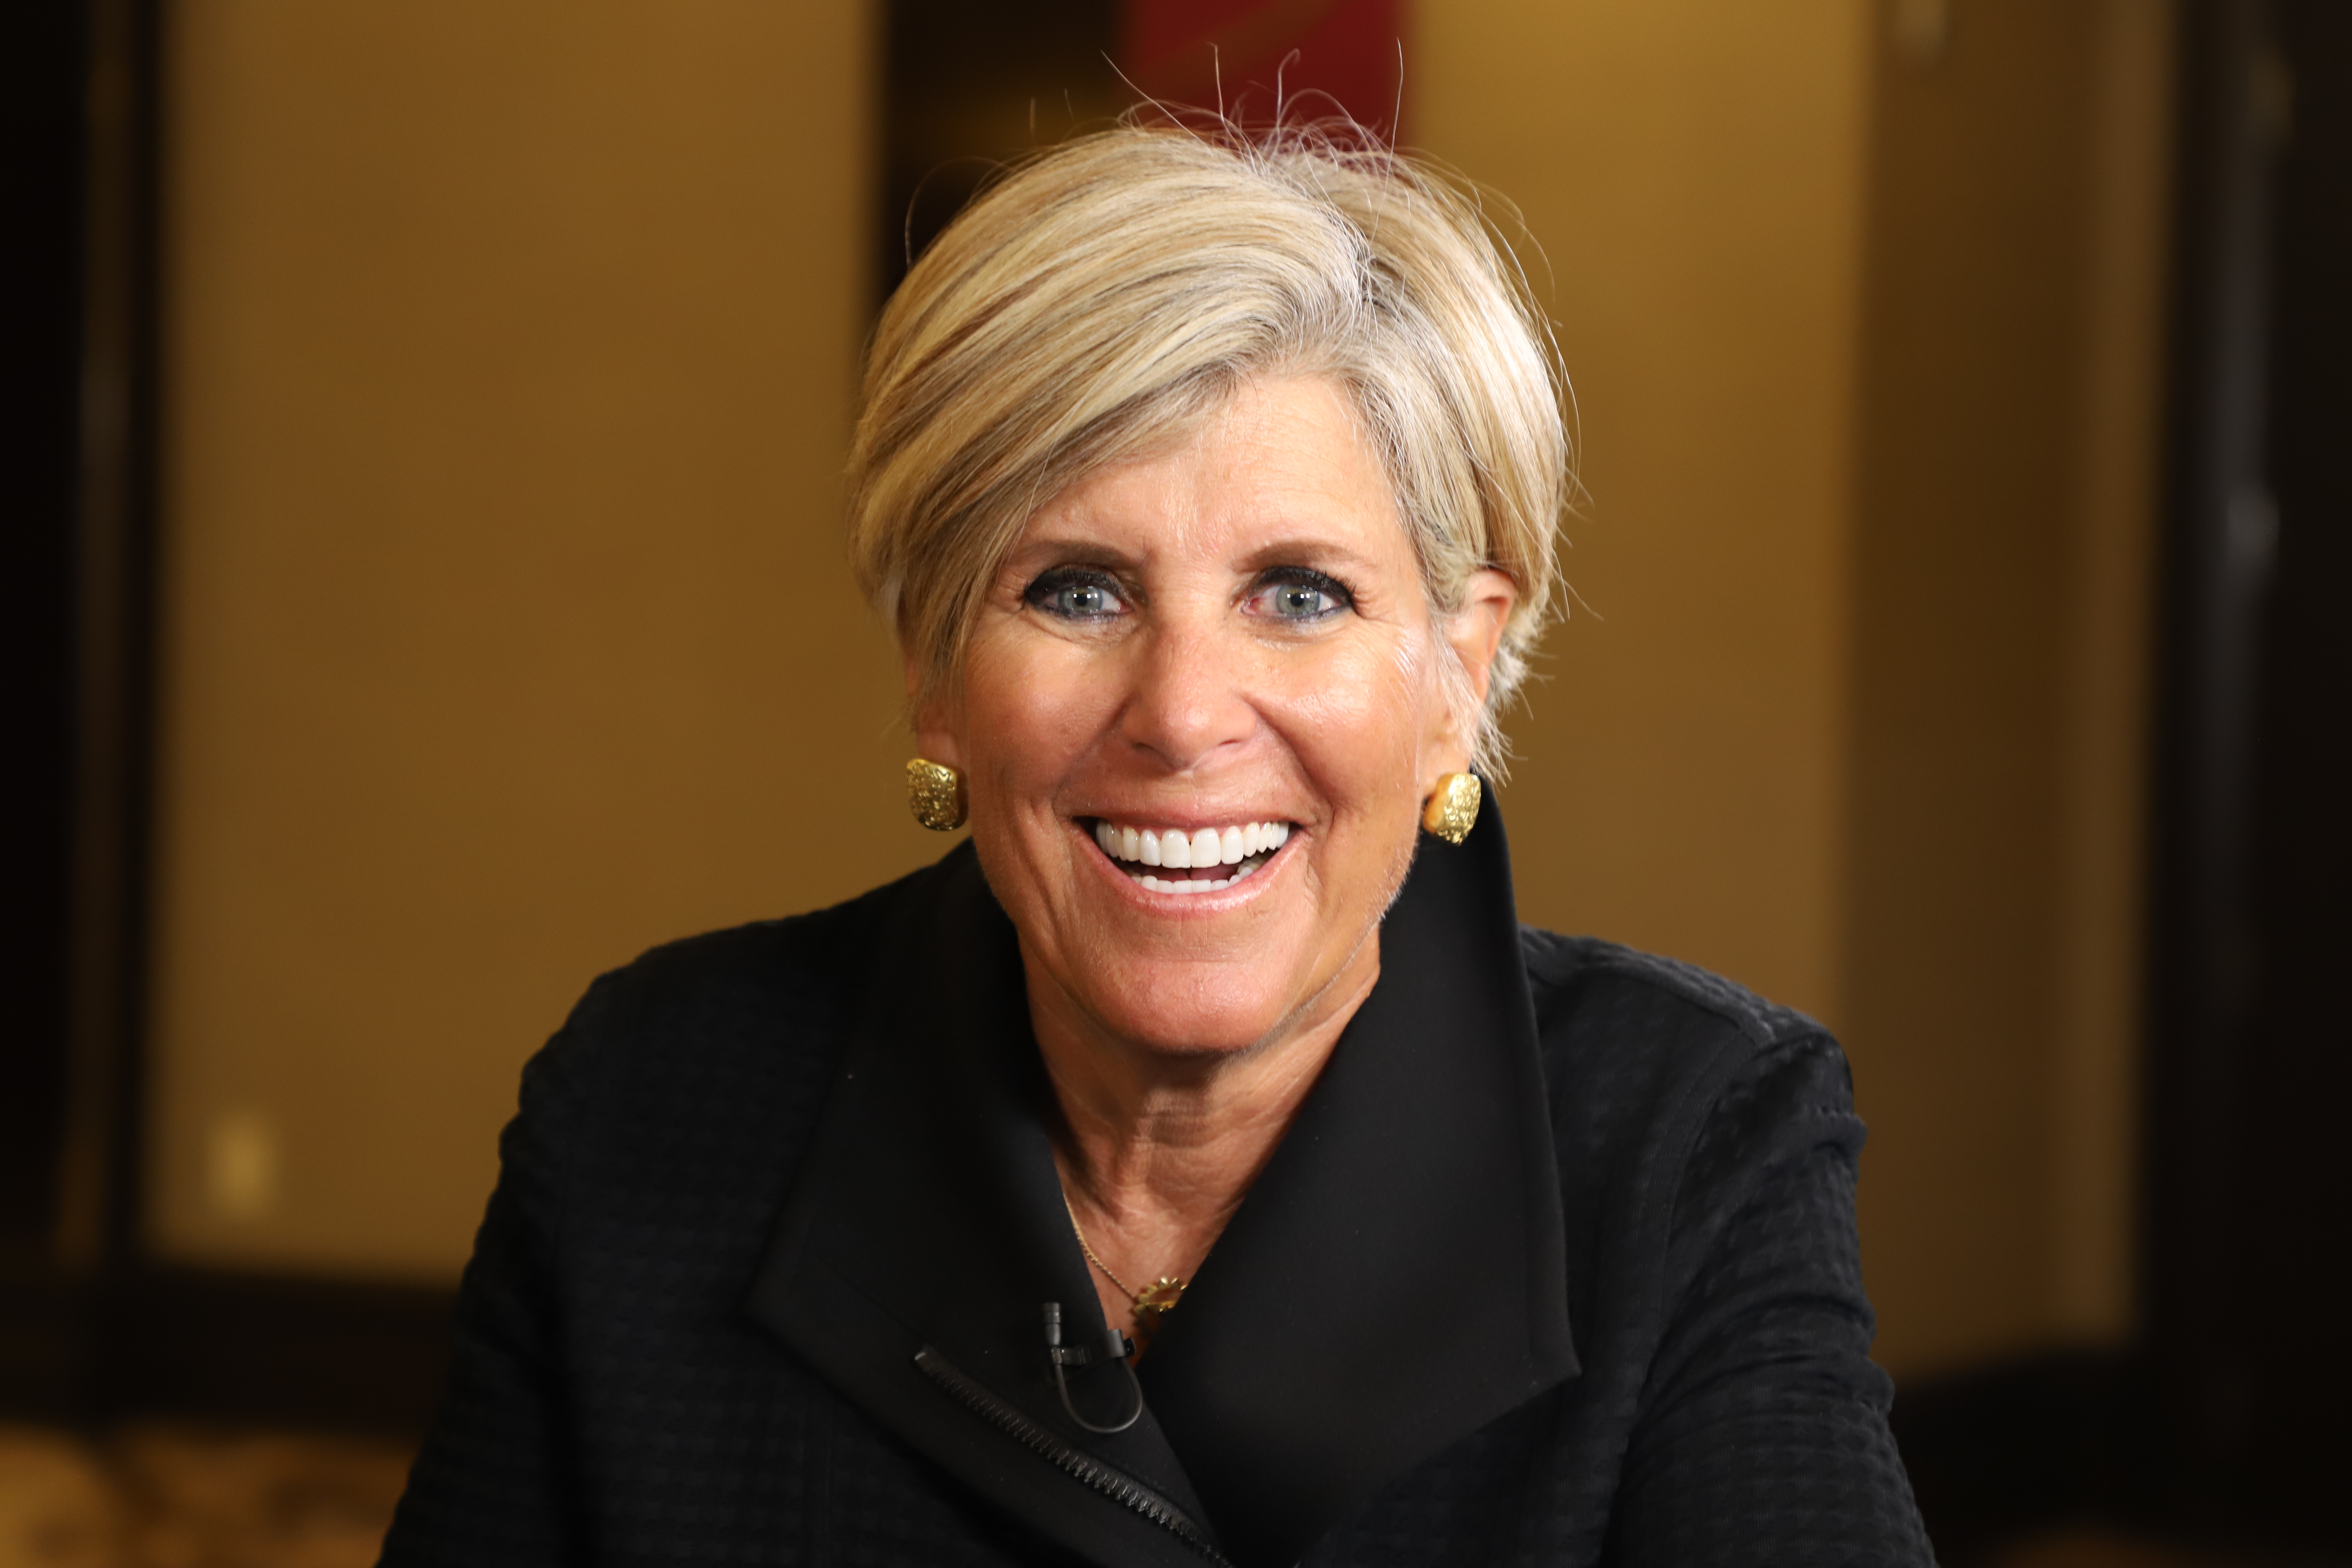 Hairstyle suze orman